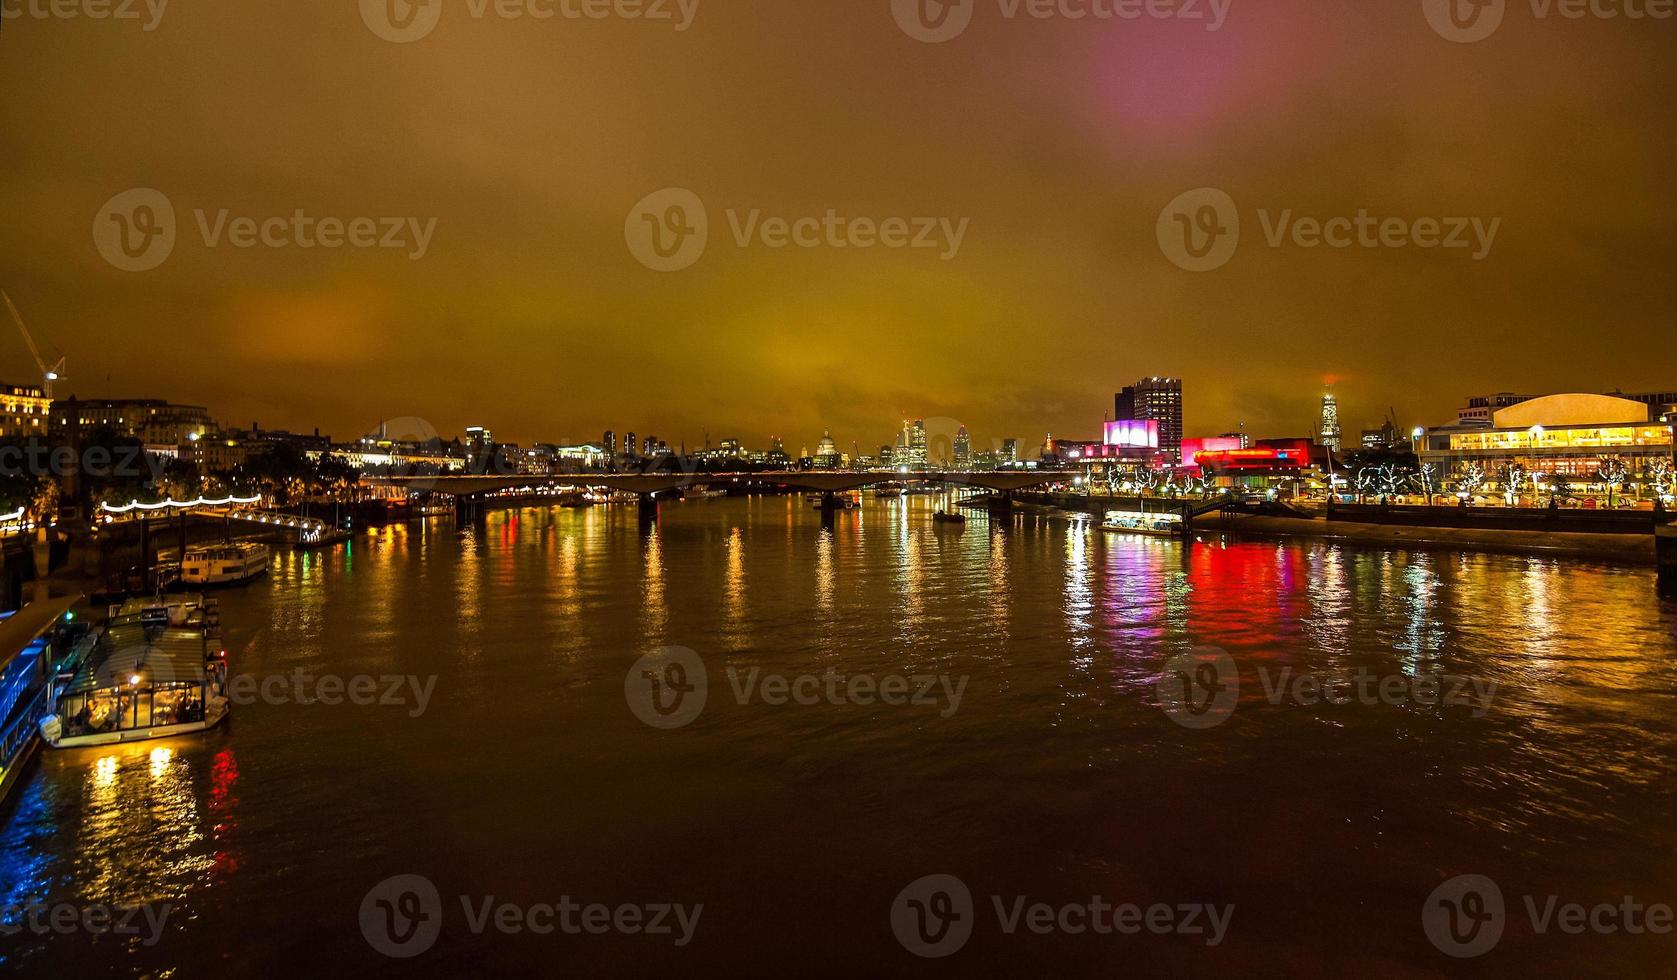 HDR River Thames in London photo